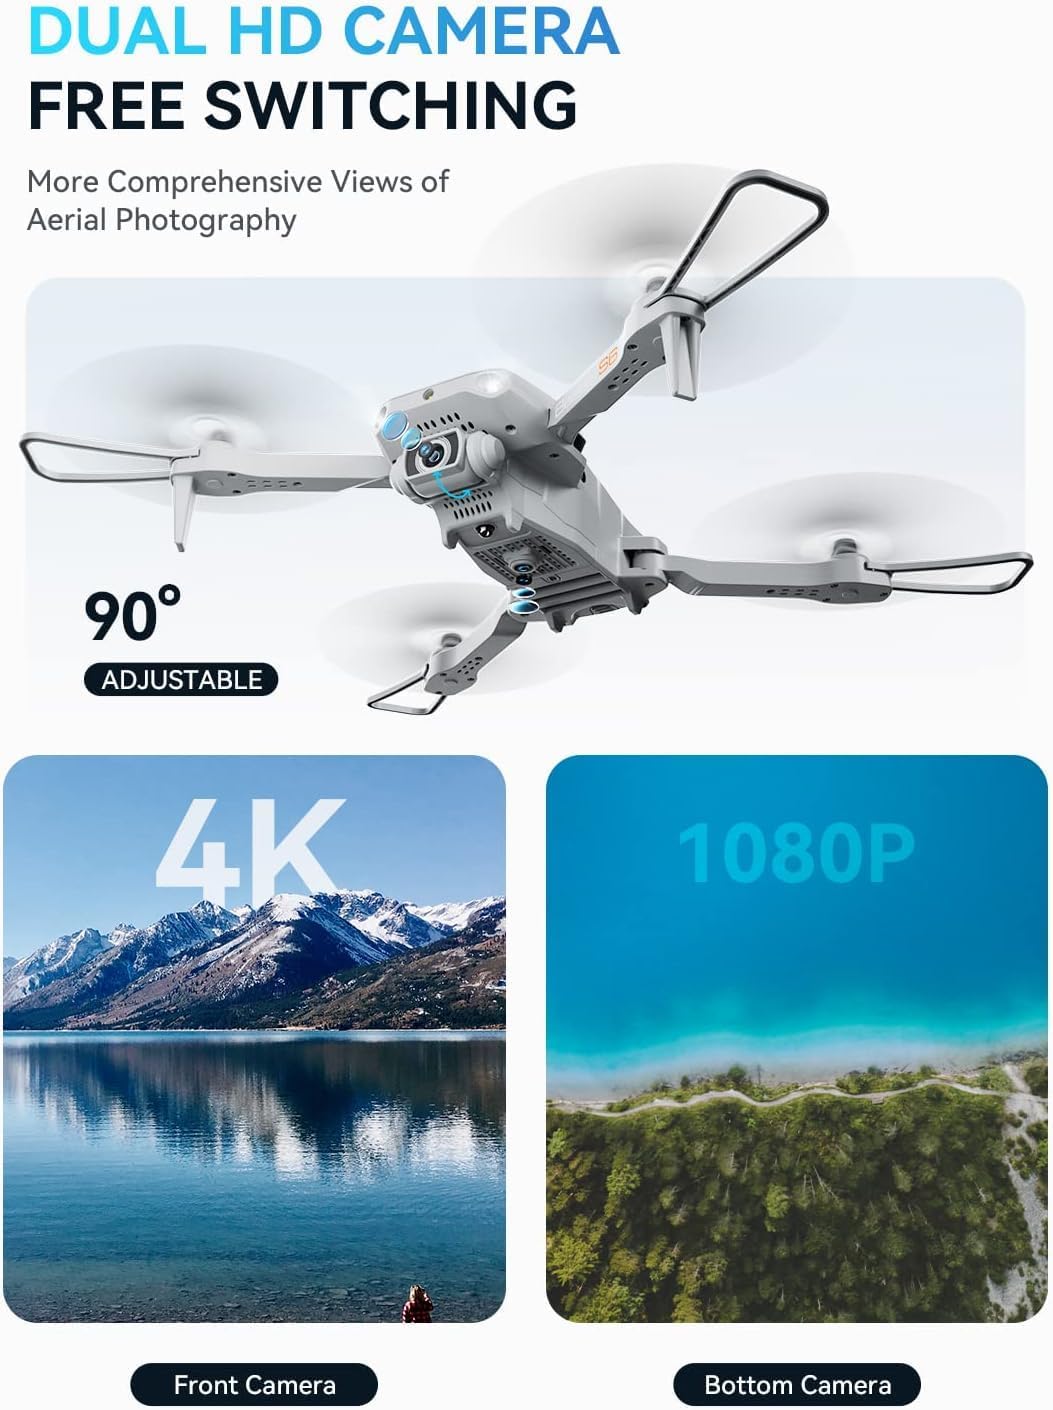 ROVPRO S60 Drone, DUAL HD CAMERA FREE SWITCHING More Comprehensive View